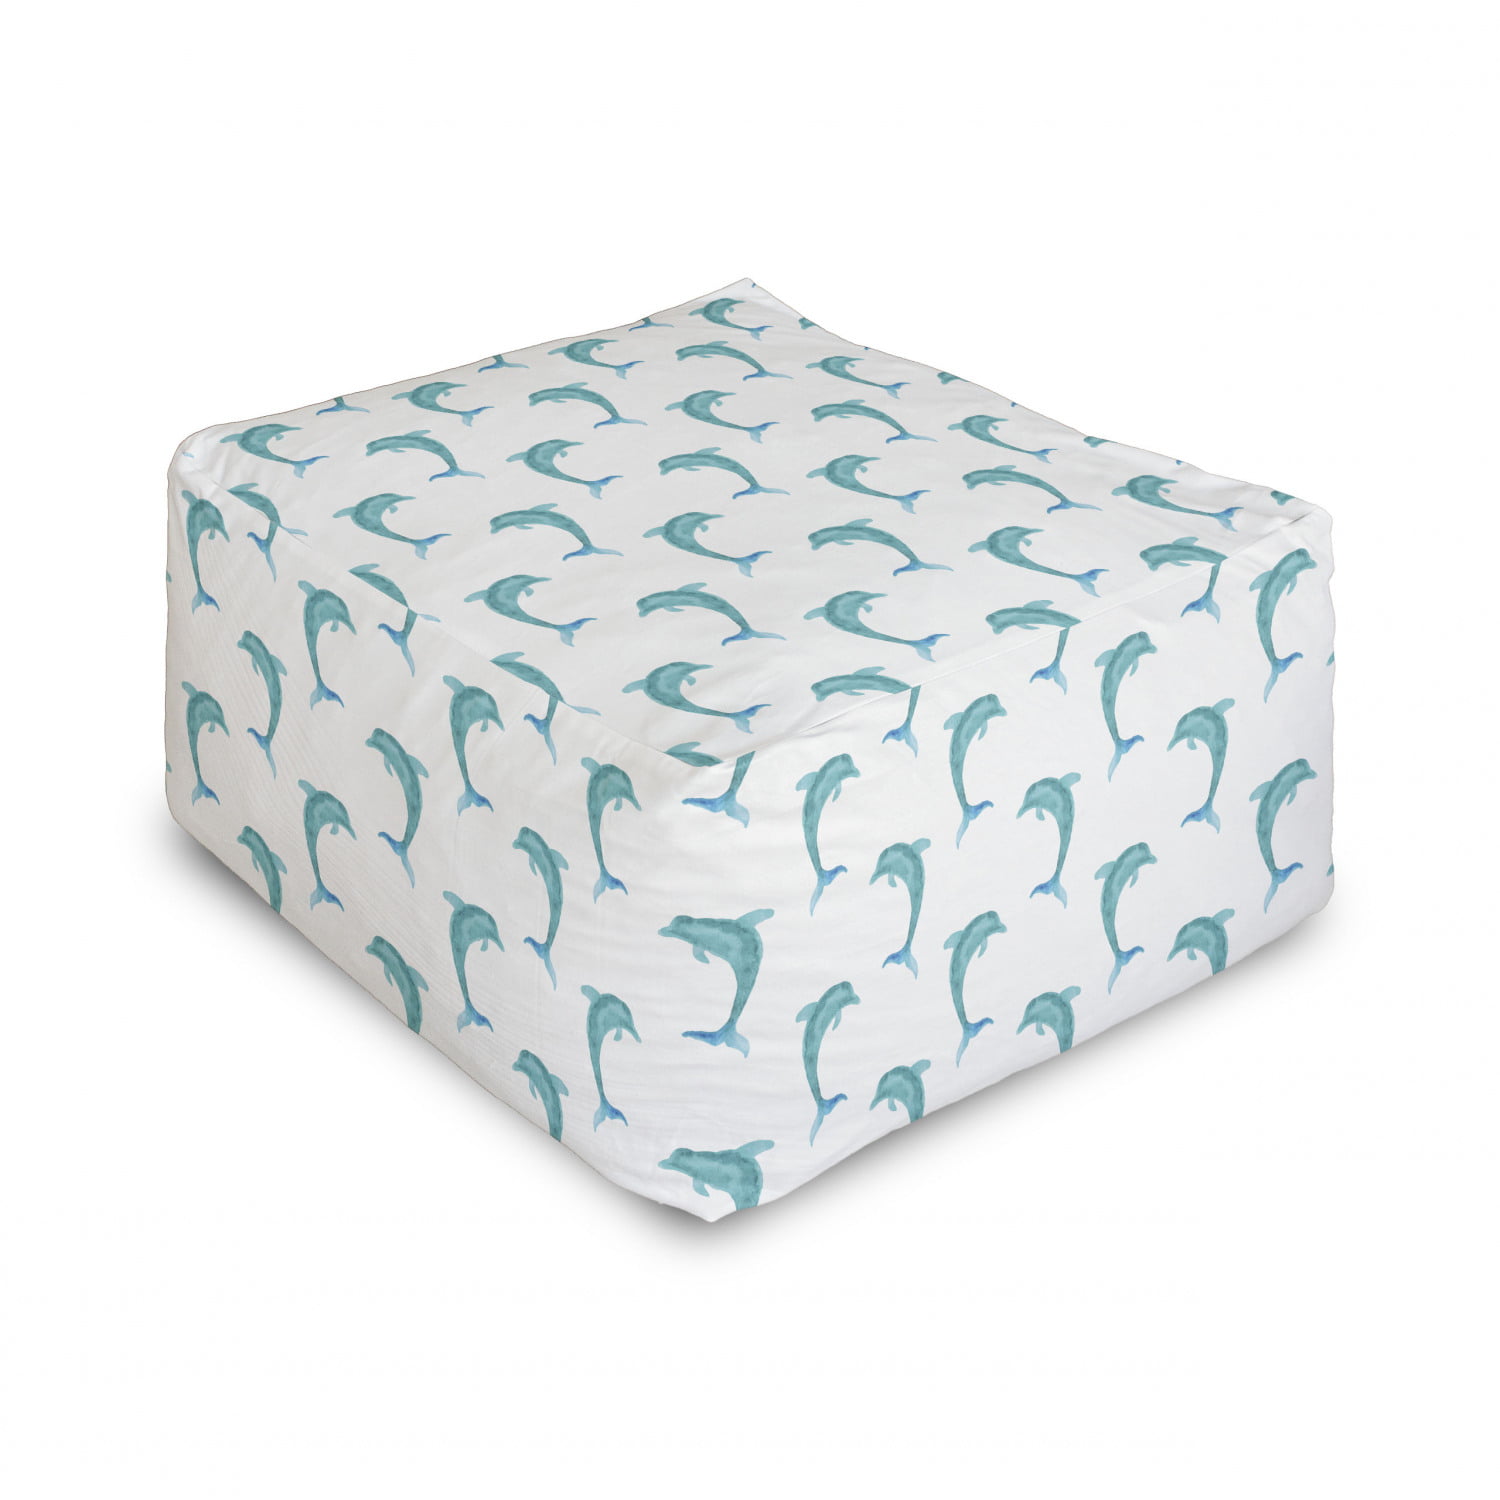 Ambesonne Boat Rectangle Pouf Under Desk Foot Stool for Living Room Office Ottoman with Cover 25 Multicolor Rhythmic Motifs of Sailboats Nautical Theme on a Plain Backdrop Marine Lifestyle 